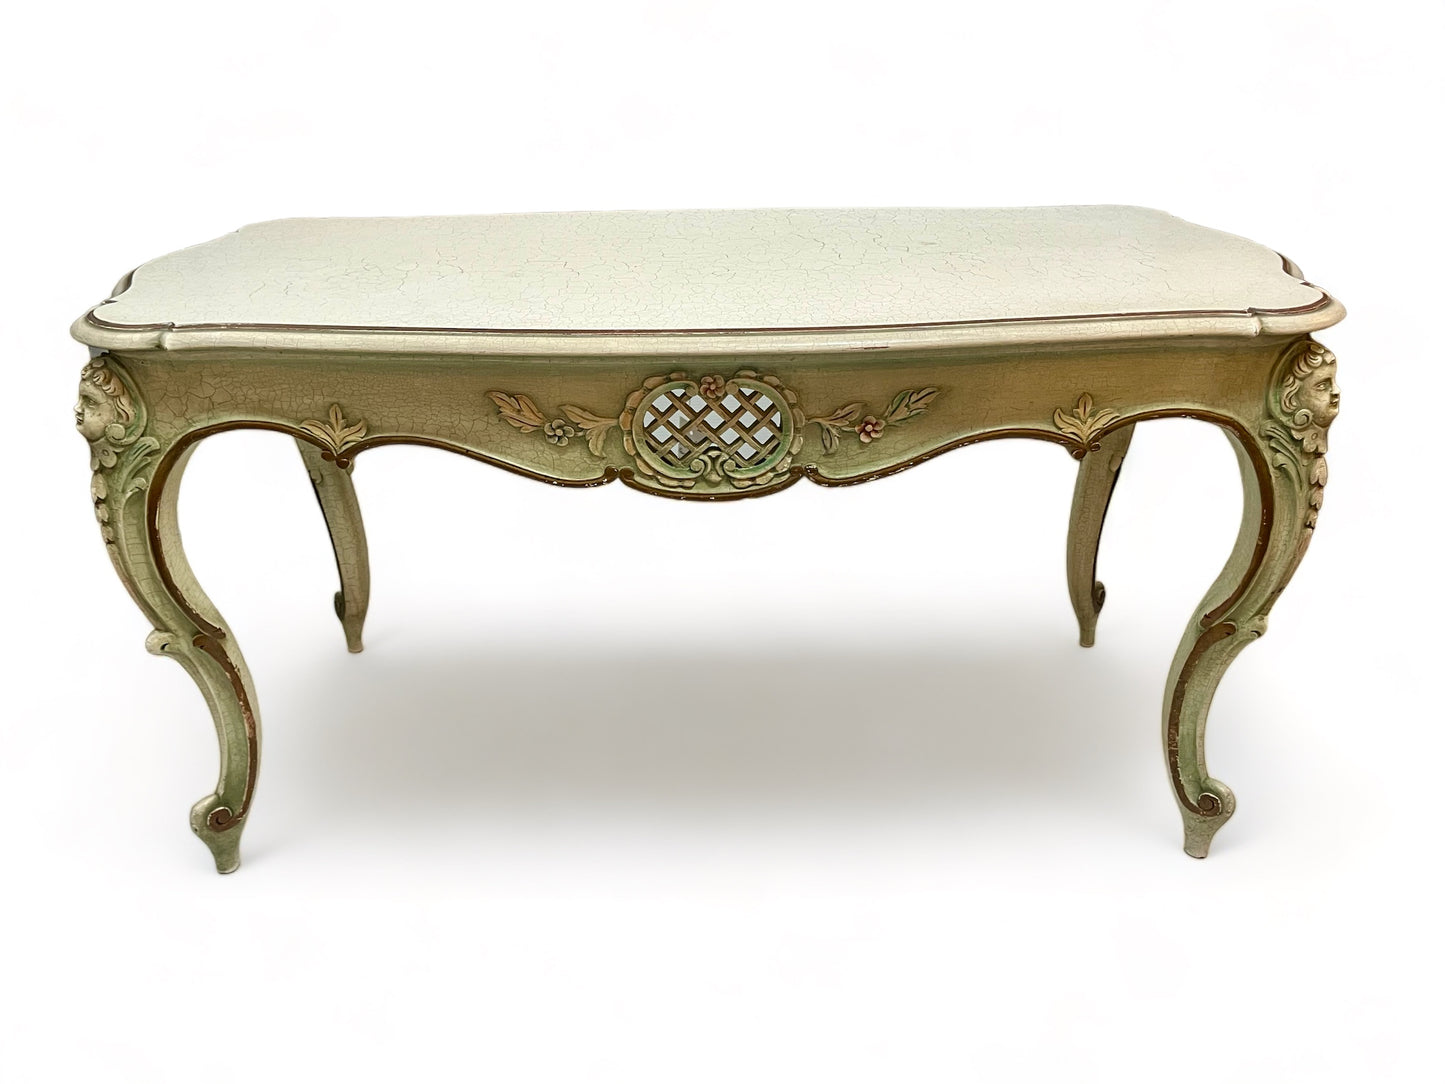 A vintage 1920 French carved, parcel gilt and painted with crackle finish coffee table